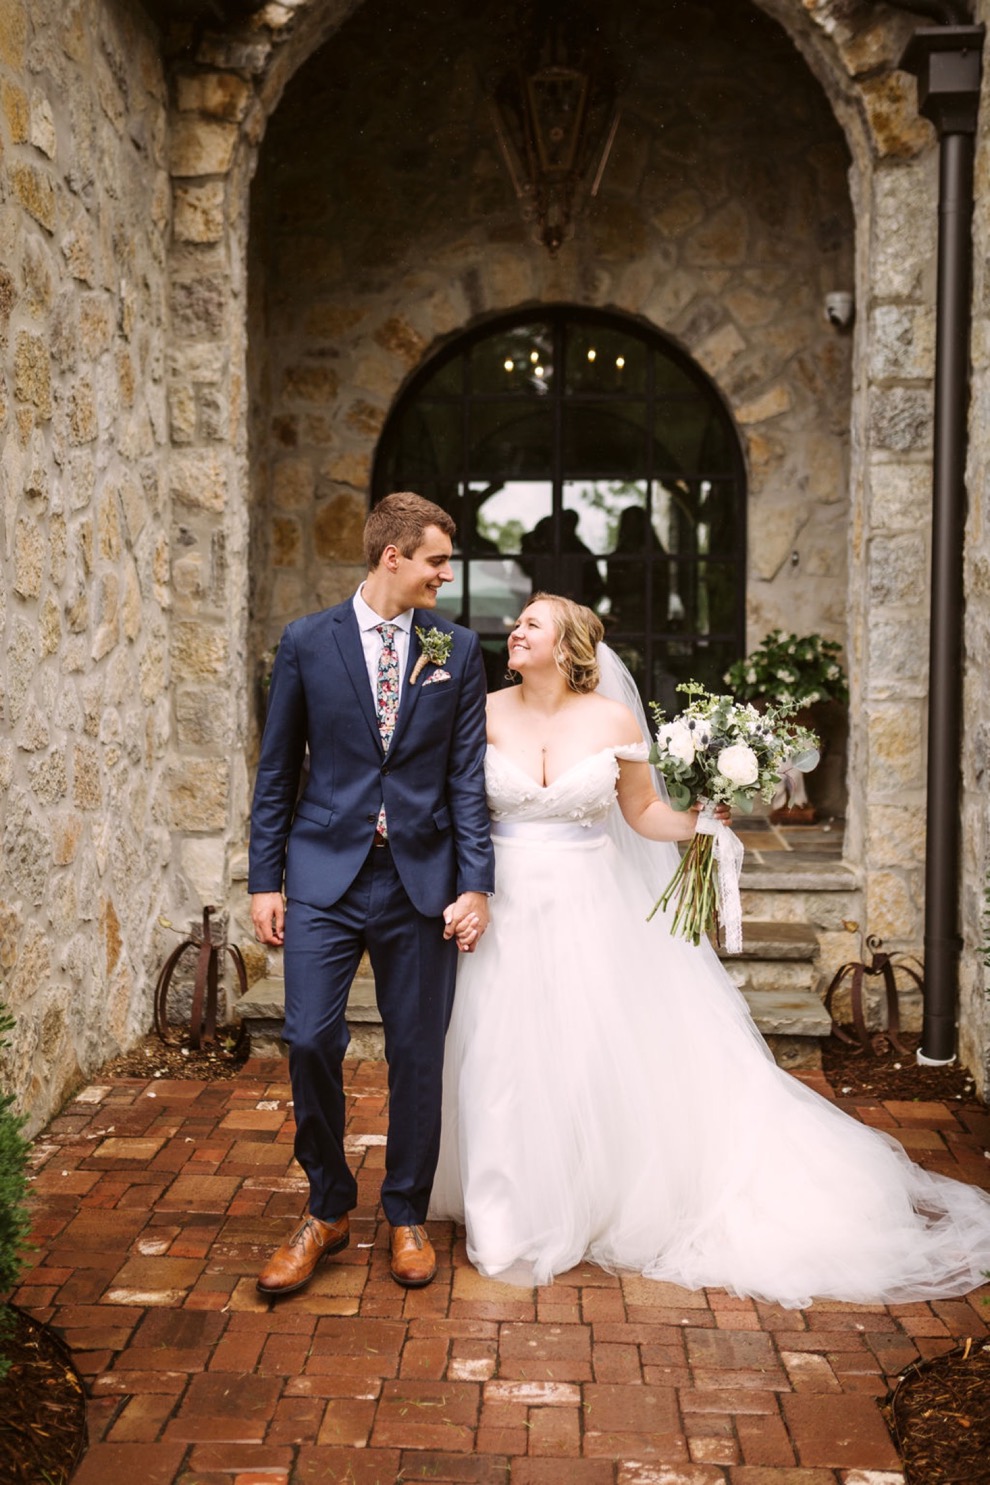 bride and groom walking hand in hand down a brick pathway in front of a stone house